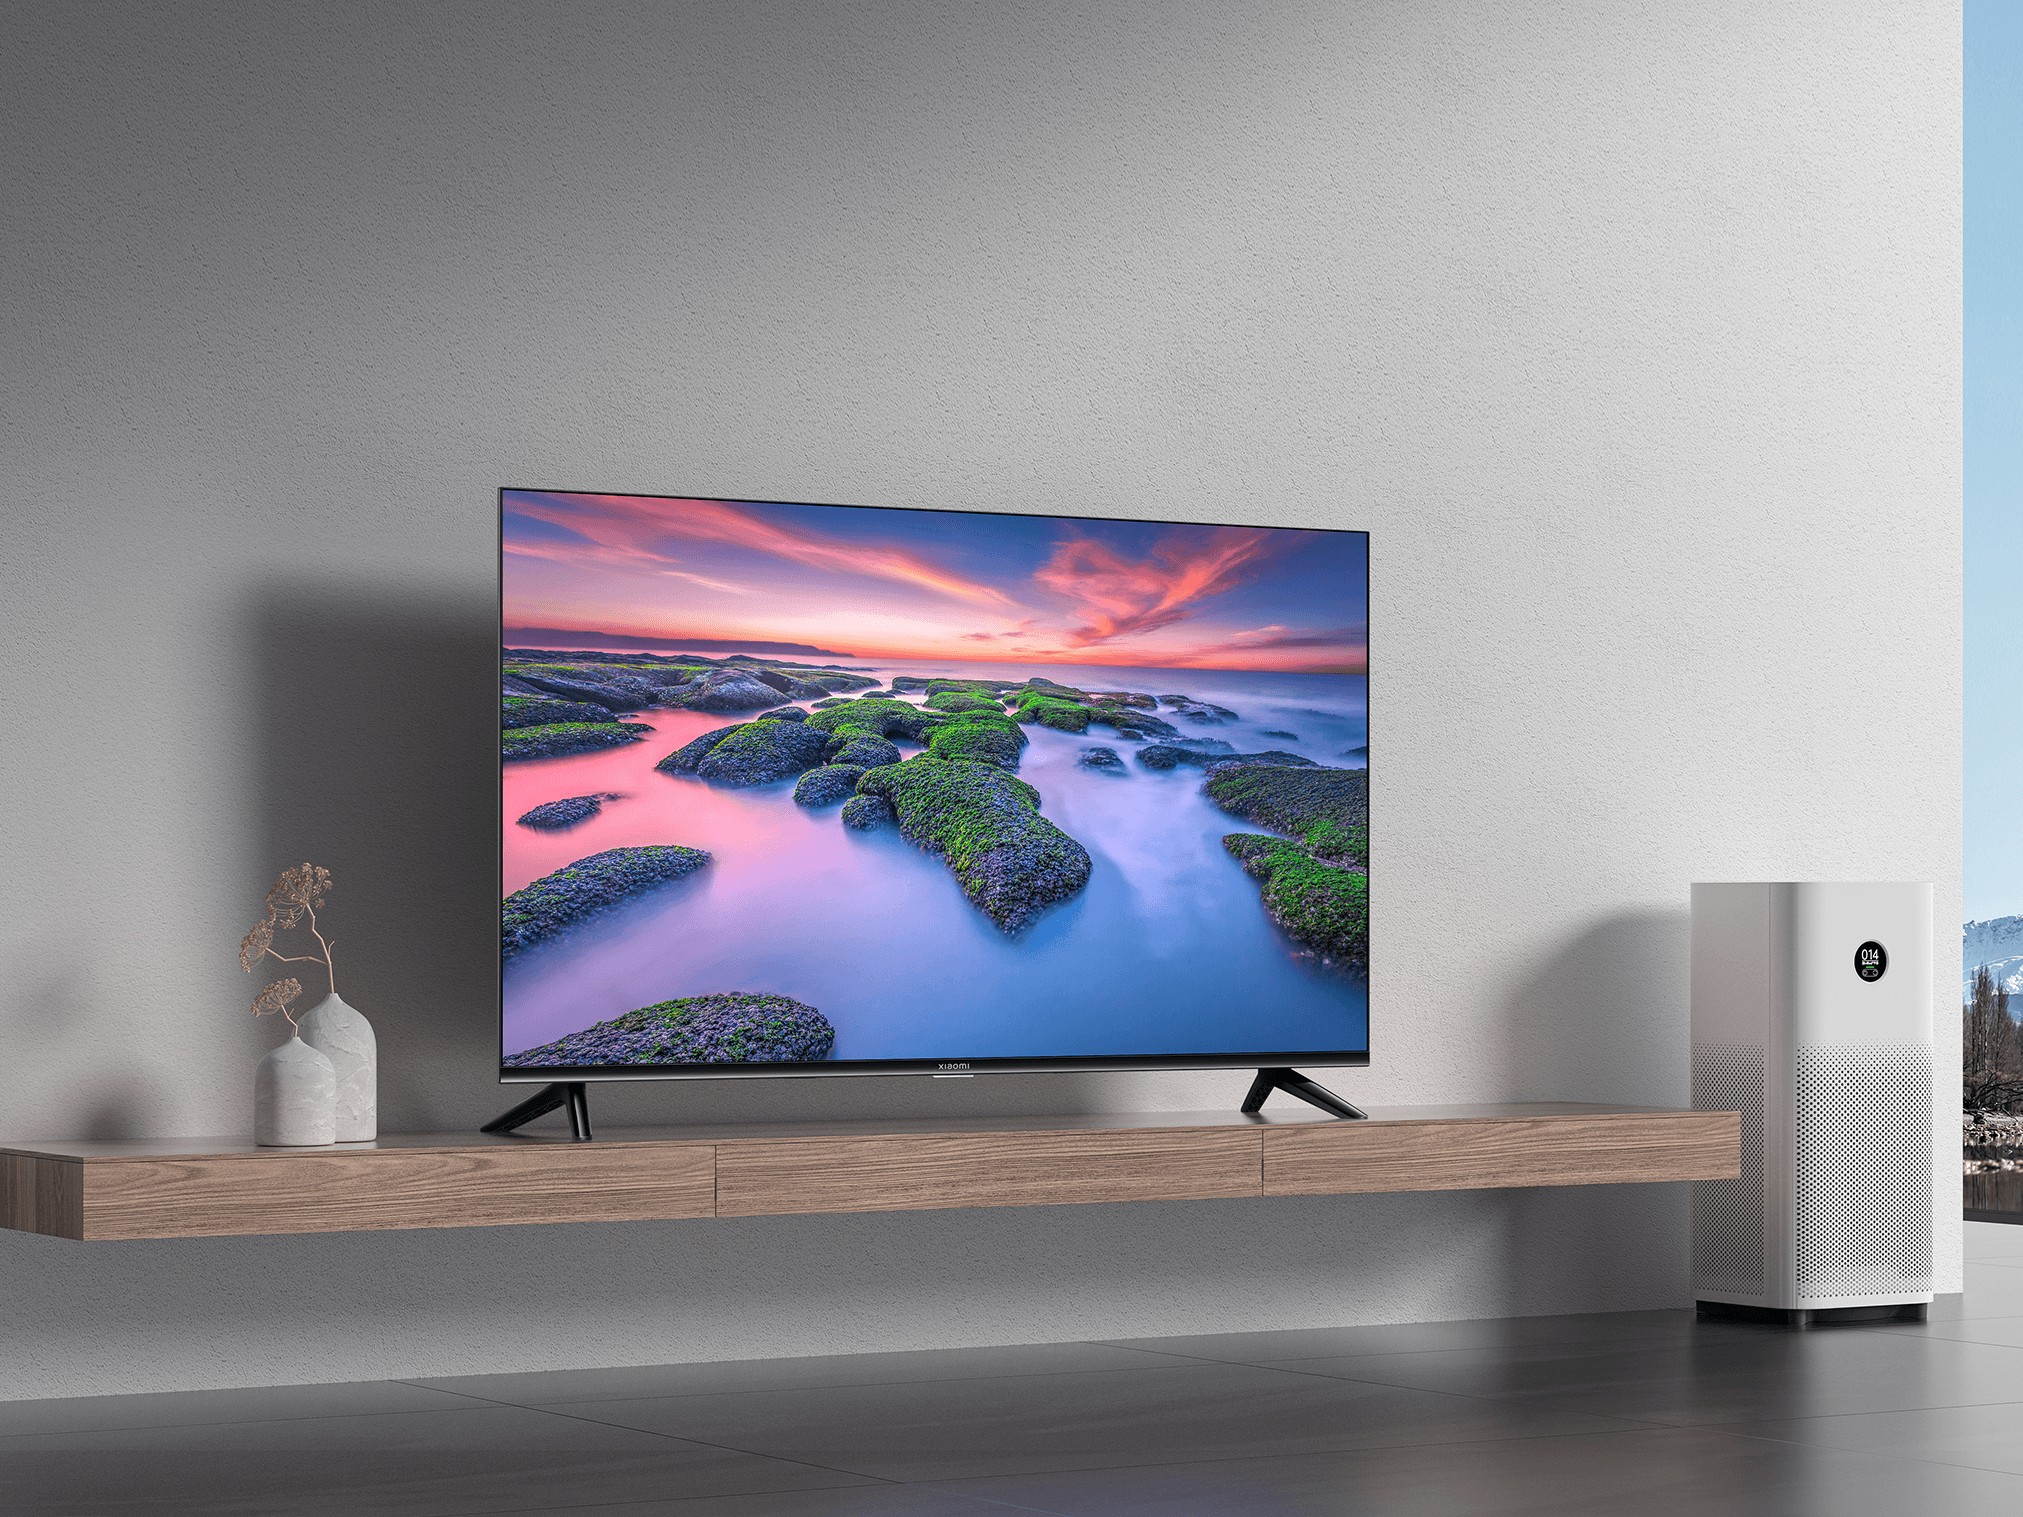 Xiaomi TV A2 FHD 43-in revealed with ultra-thin bezel and DTS Virtual:X Sound support - NotebookCheck.net News